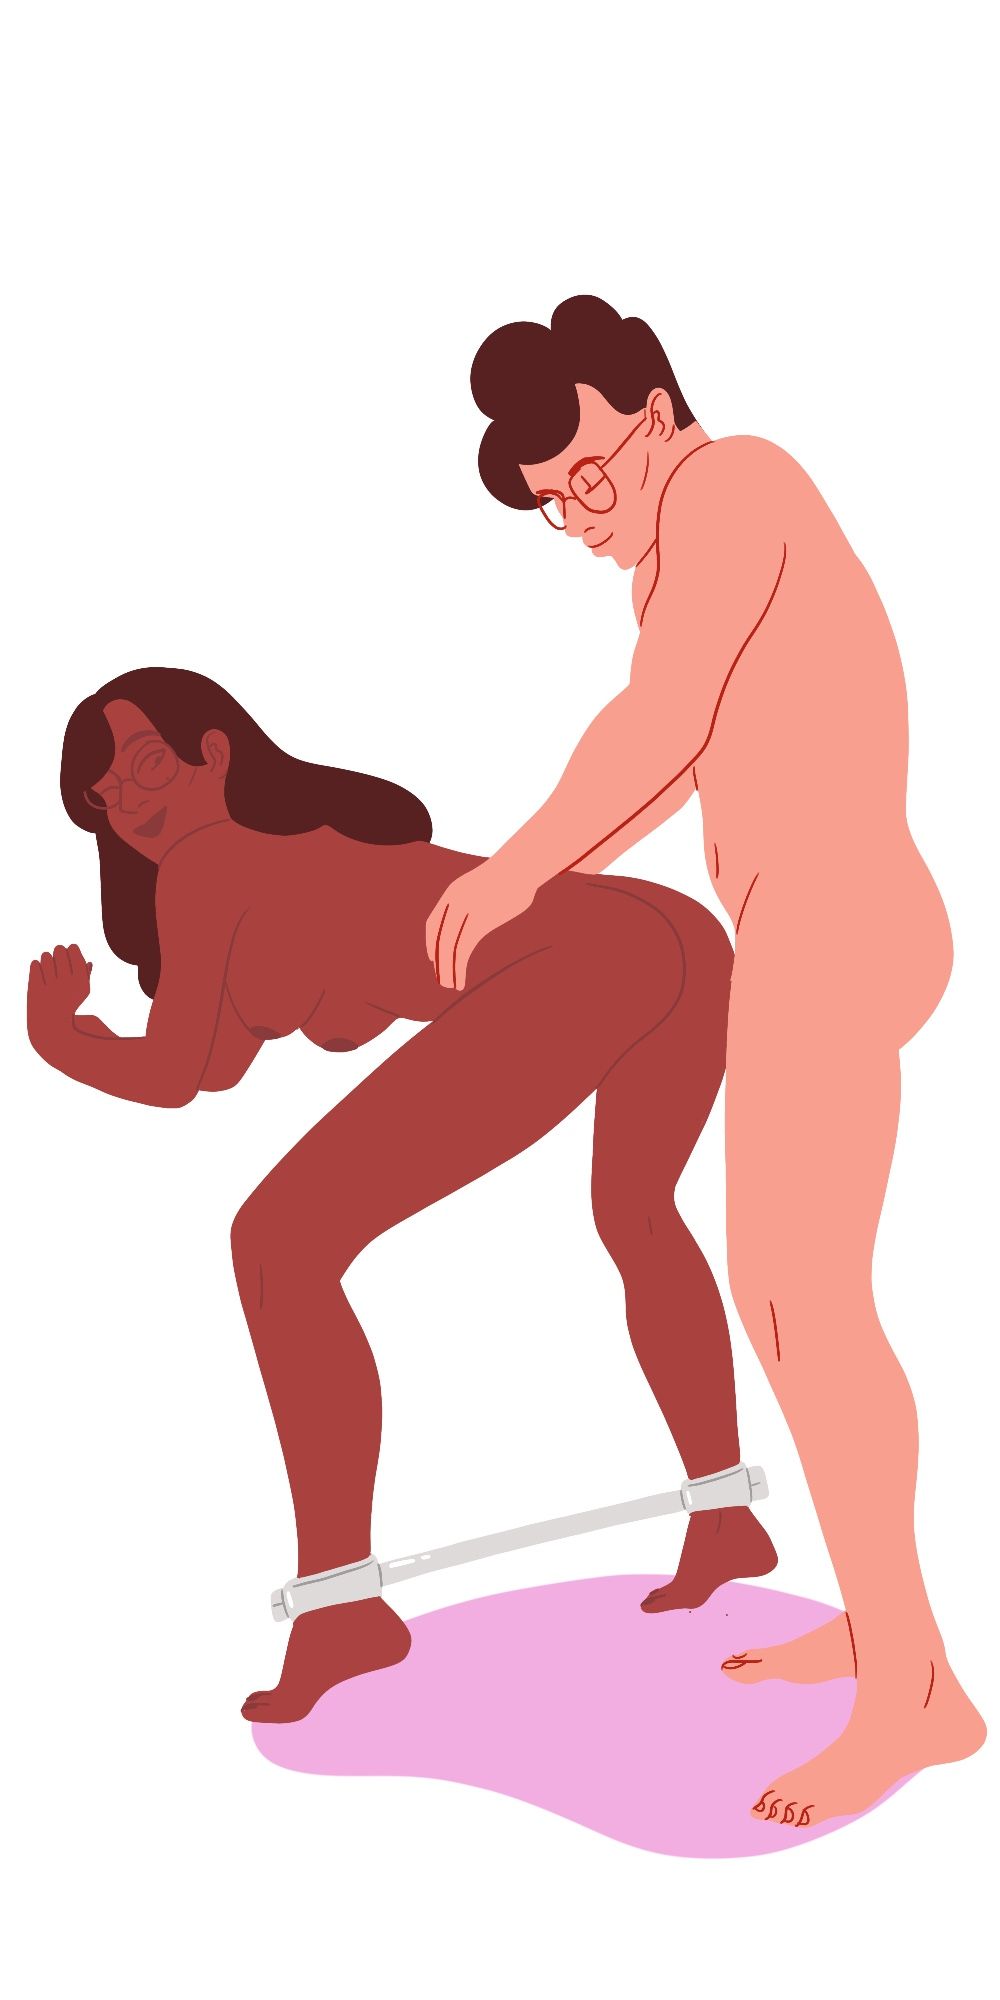 11 Submissive Sex Positions